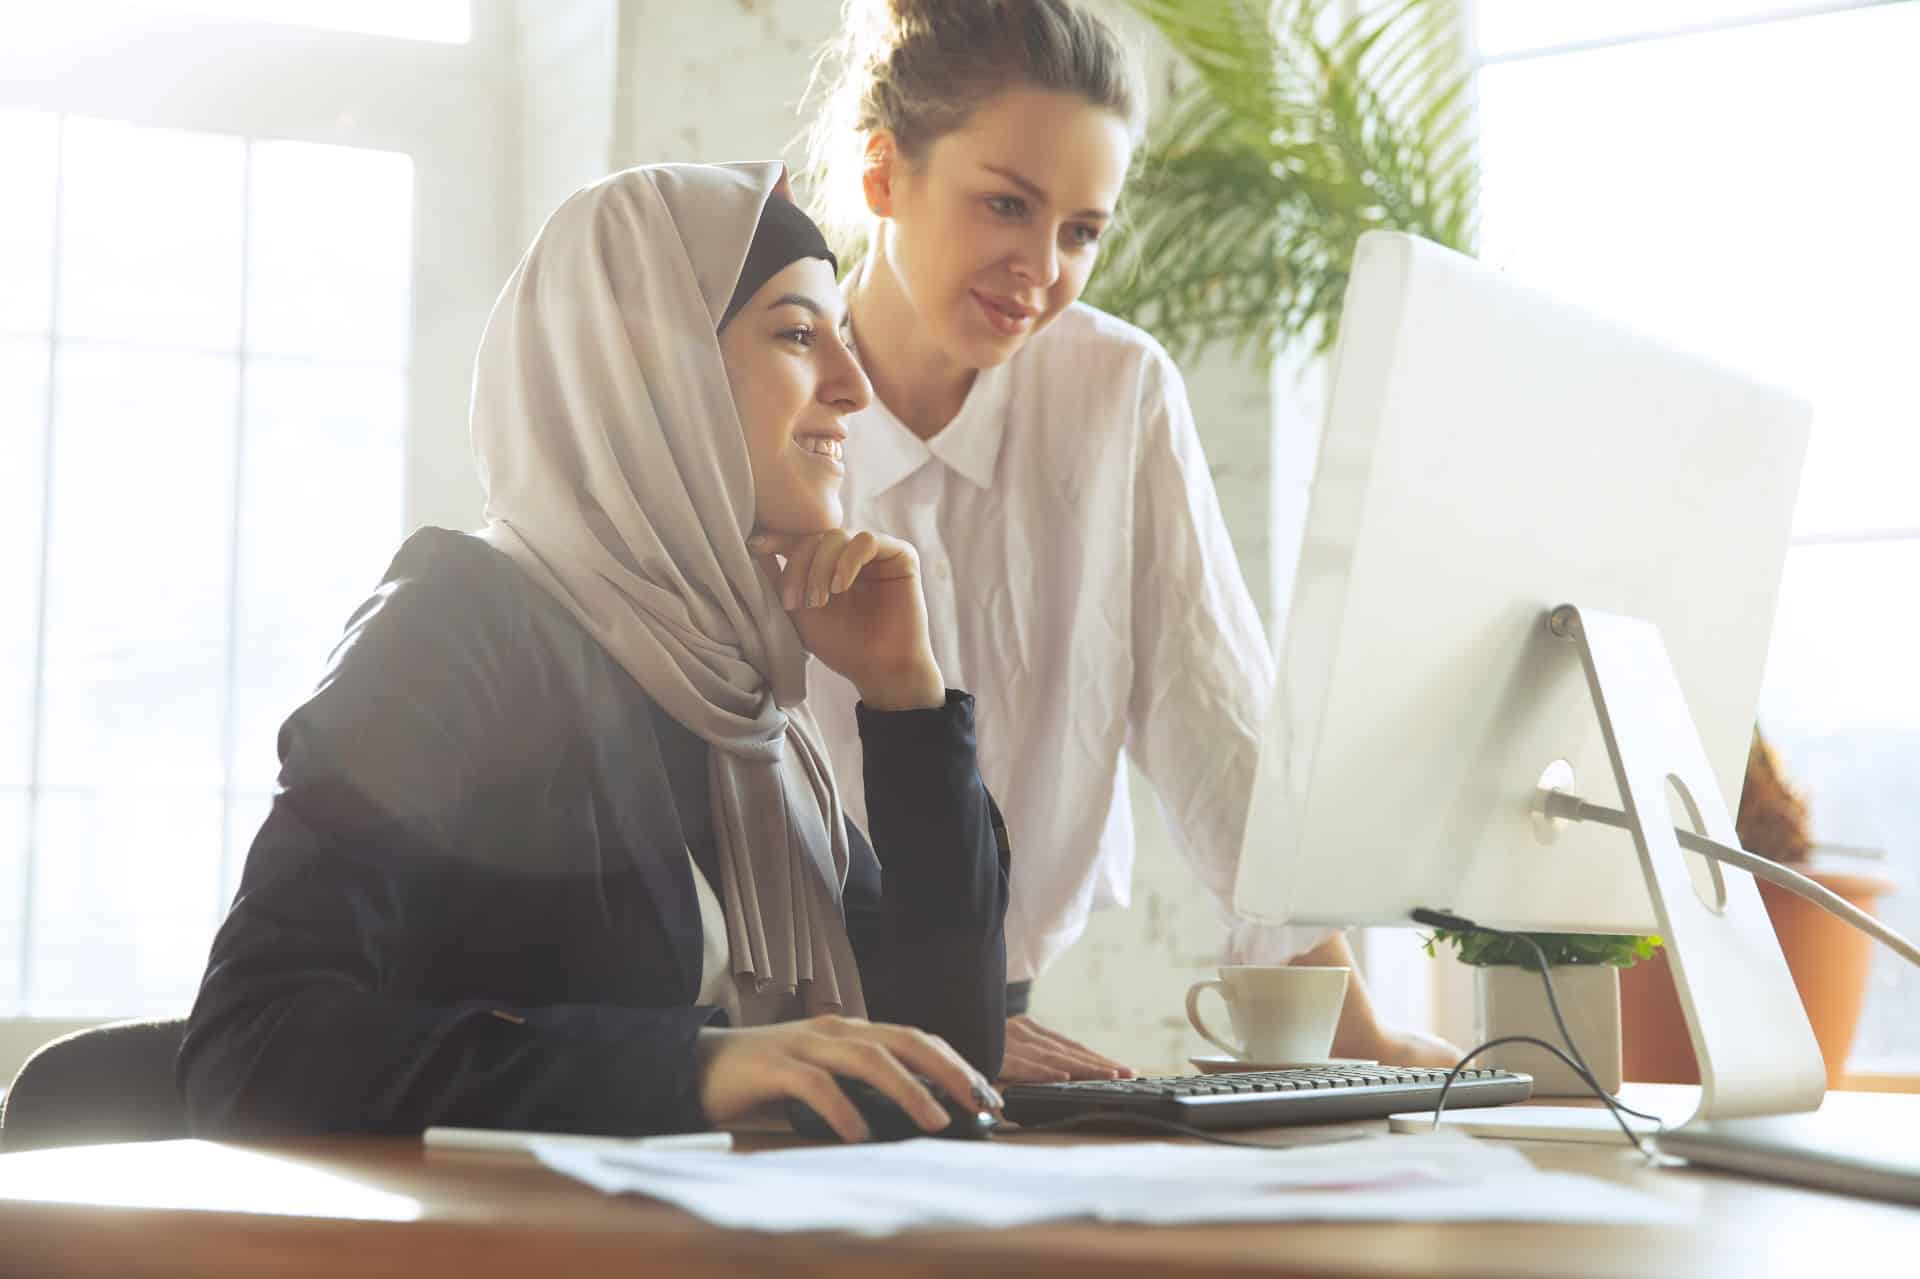 Interfaith colleagues collaborate at work | employment discrimination ny | Gash & Associates, P.C.